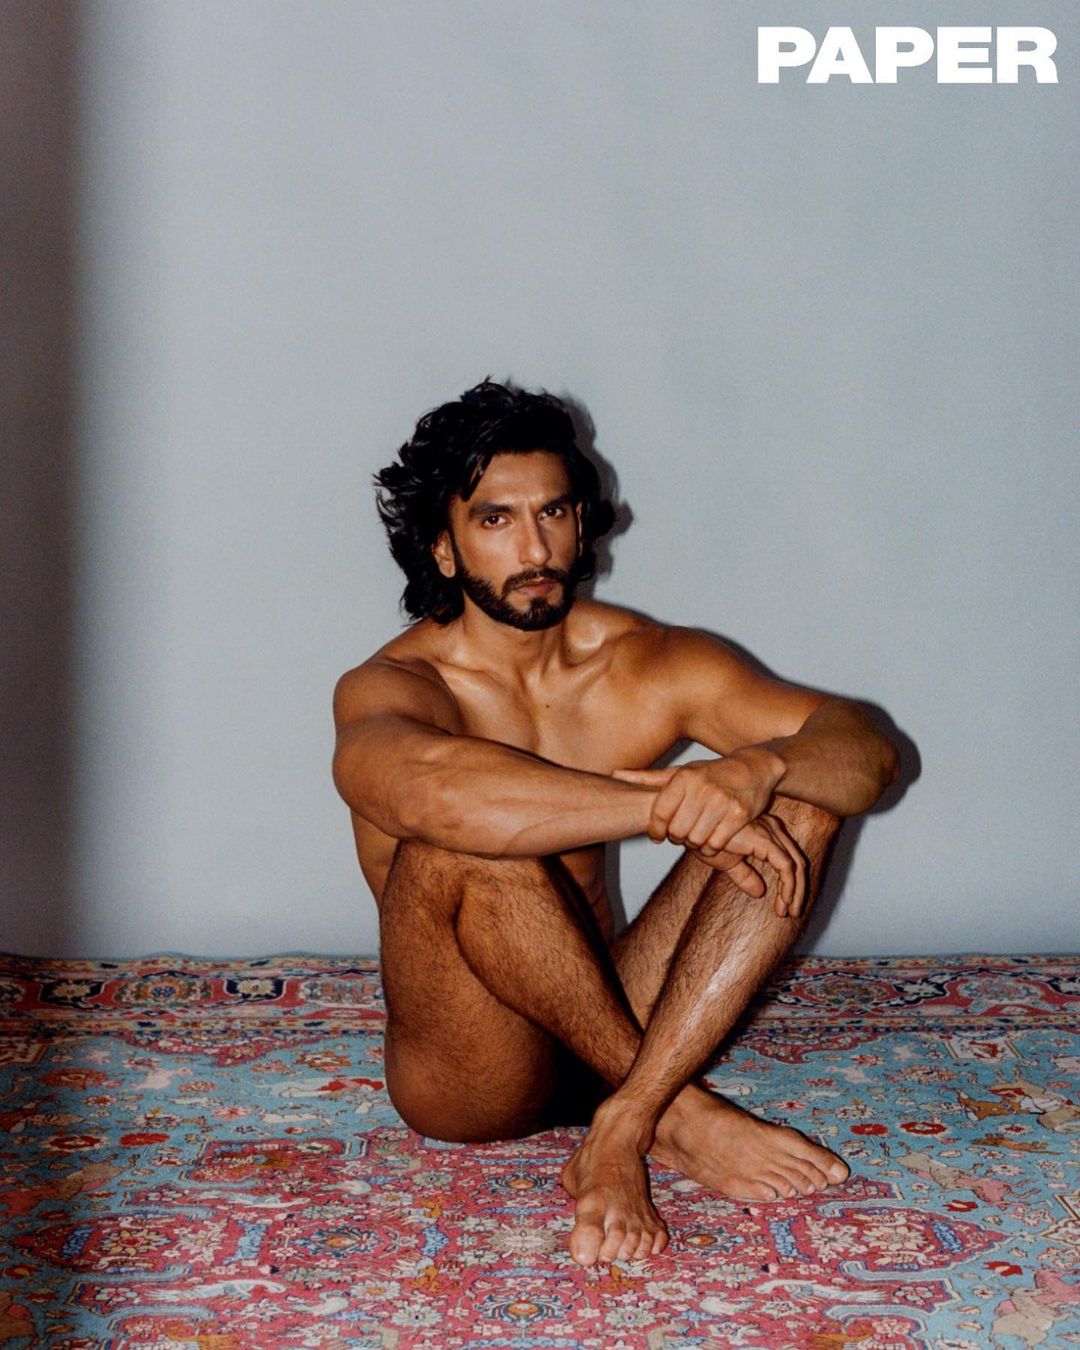 Ranveer Singh, who is known for his maximalist fashion choices, has surprised fans with the nude photoshoot